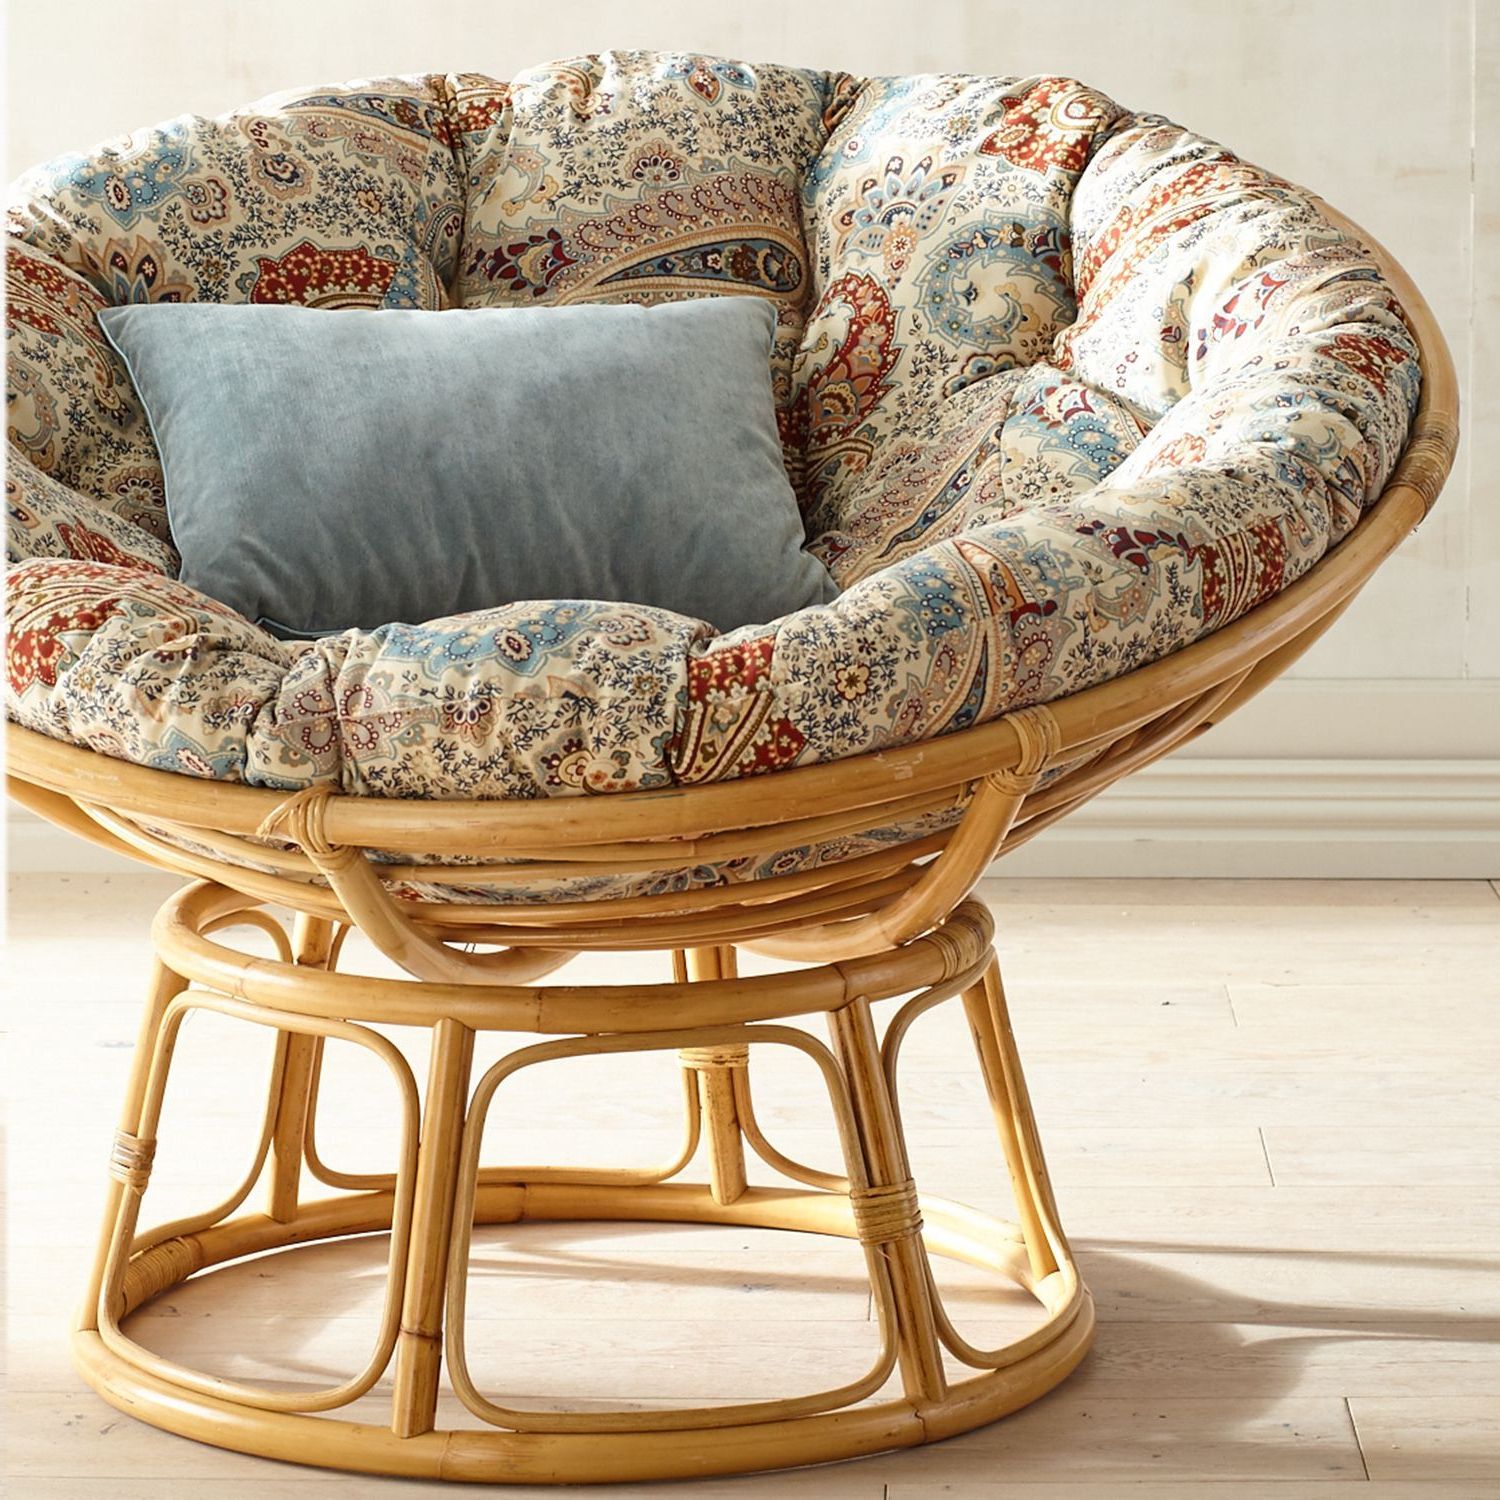 Decker Papasan Chairs Inside Best And Newest Papasan Chair Frame – Natural – Lacquer #papasanchair (View 13 of 20)